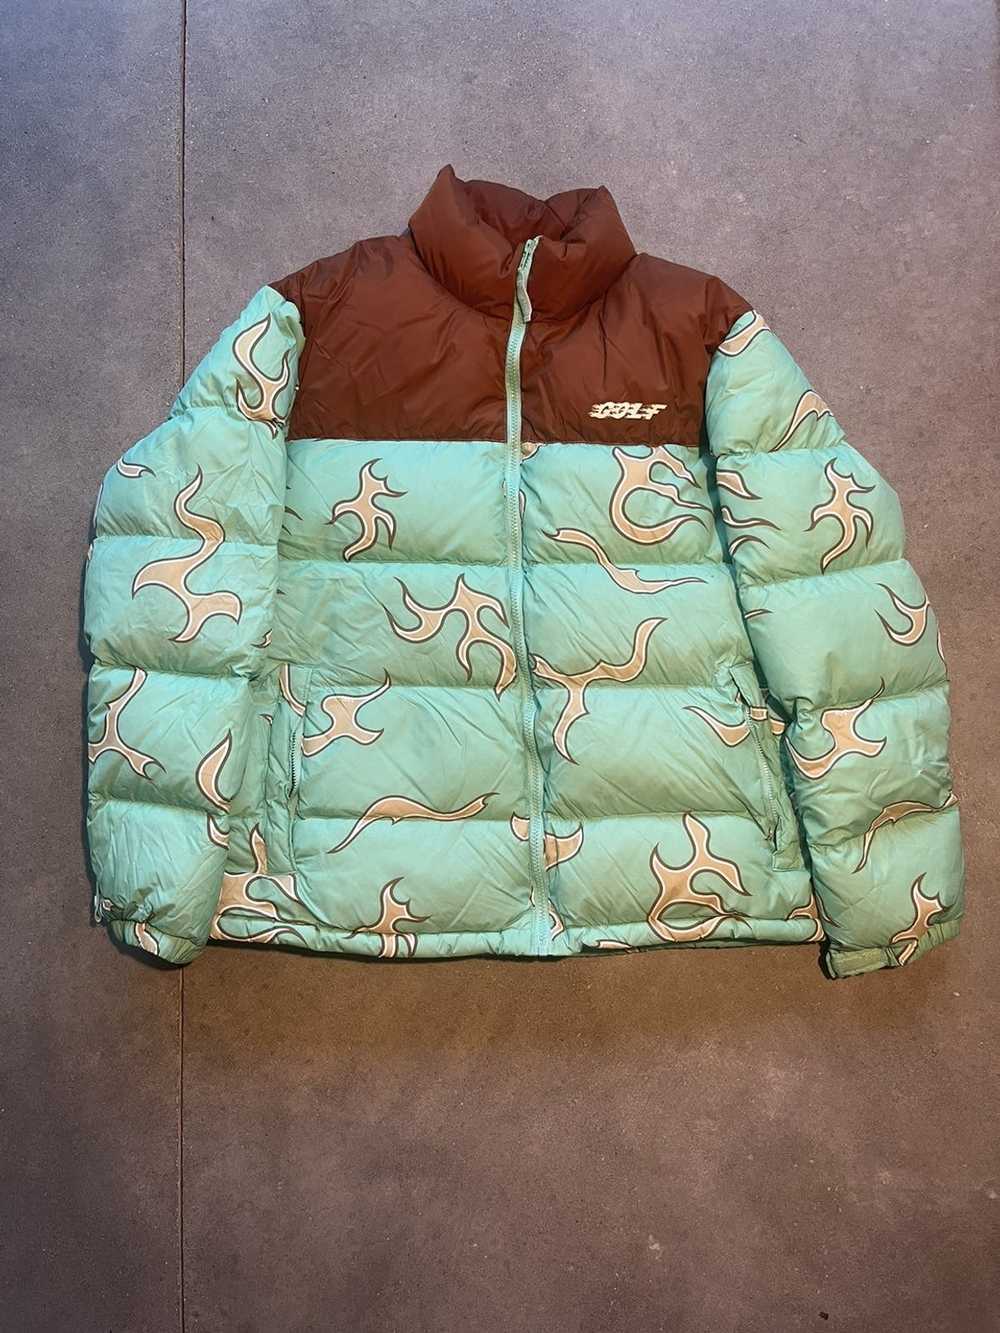 GOLF WANG LEATHER FLAME PUFFY JACKET